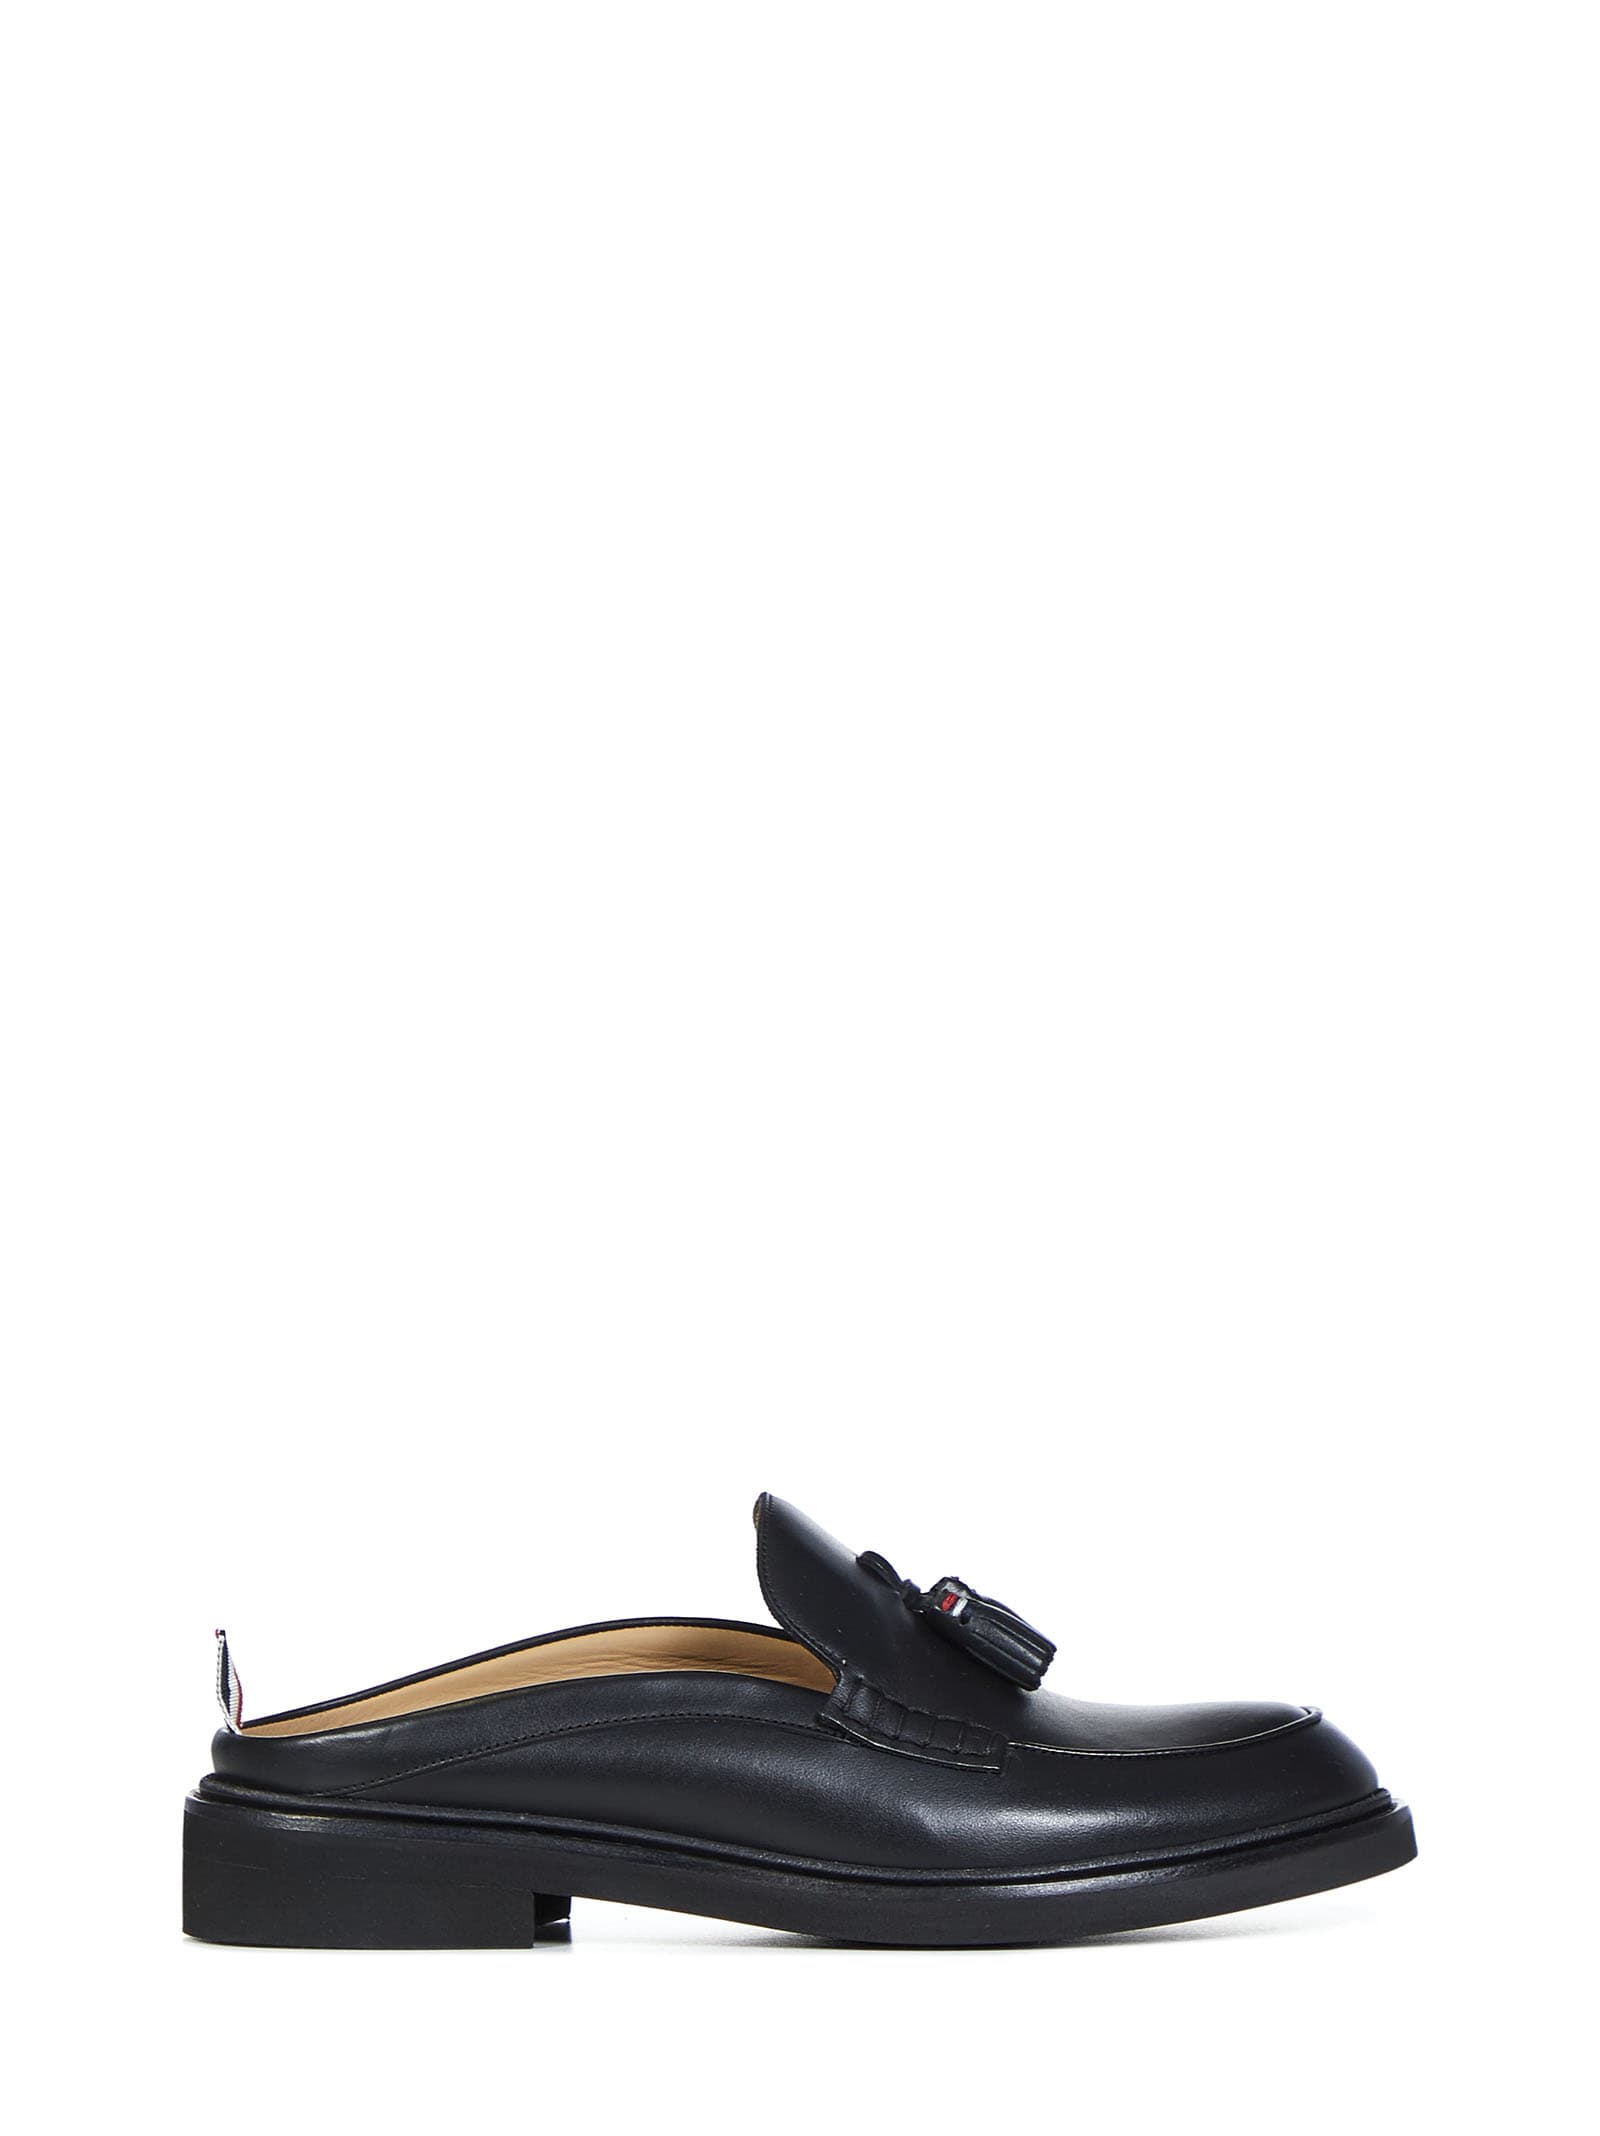 Thom Browne Loafers